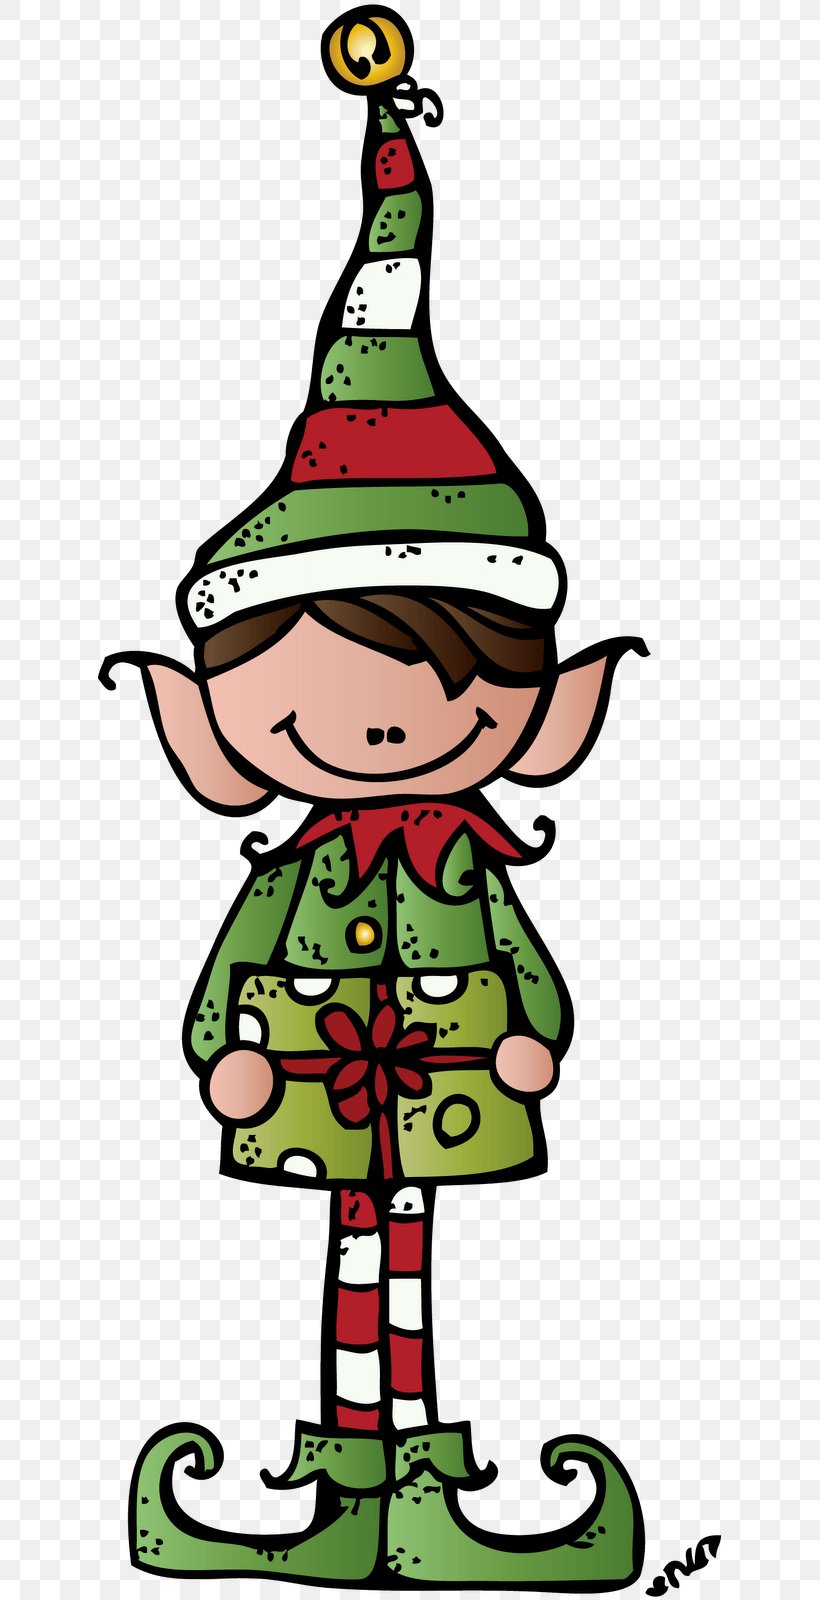 Christmas Graphics Clip Art The Elf On The Shelf Christmas Day Christmas Elf, PNG, 623x1600px, Christmas Graphics, Art, Cartoon, Christmas, Christmas Day Download Free